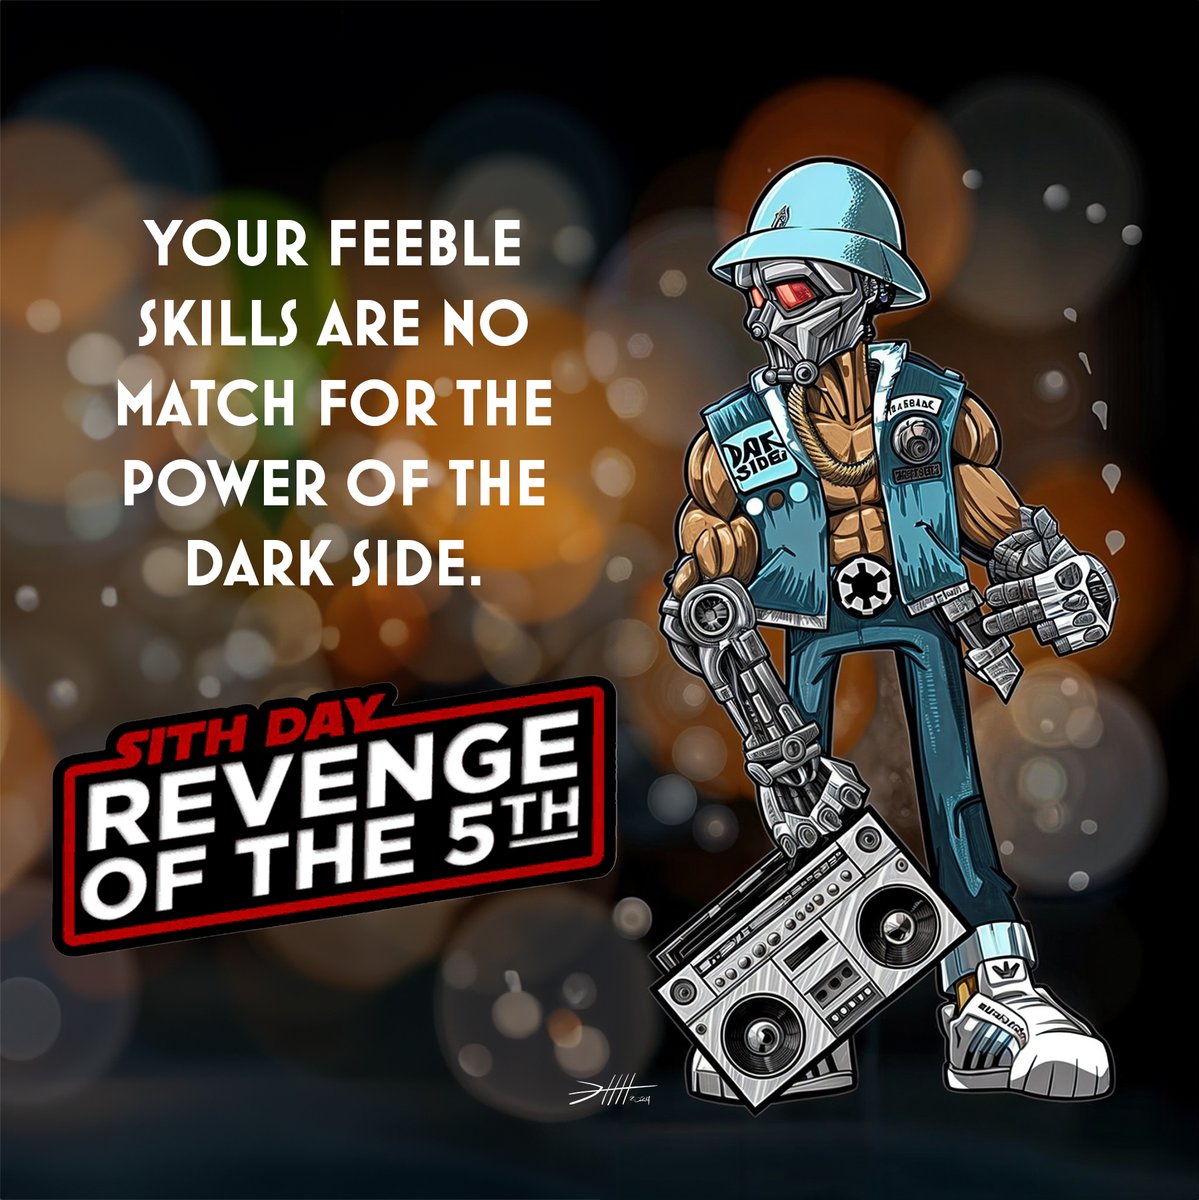 Def Lord Vader says: 
Happy Revenge of the Fifth Day!

#RevengeoftheFifth #RevengeoftheSith